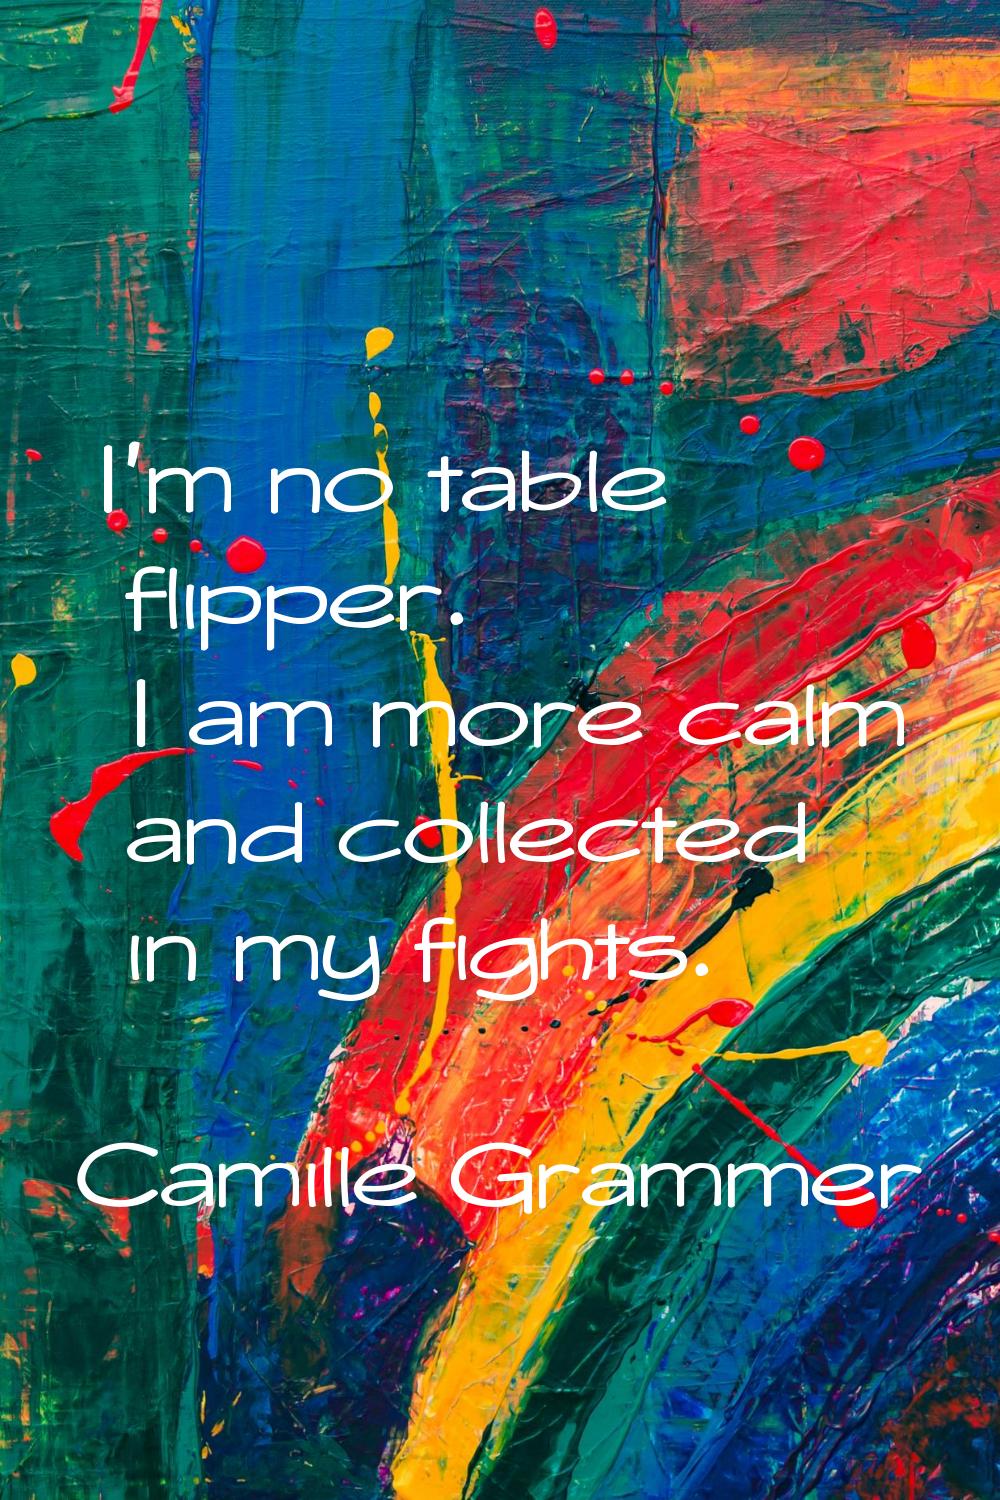 I'm no table flipper. I am more calm and collected in my fights.